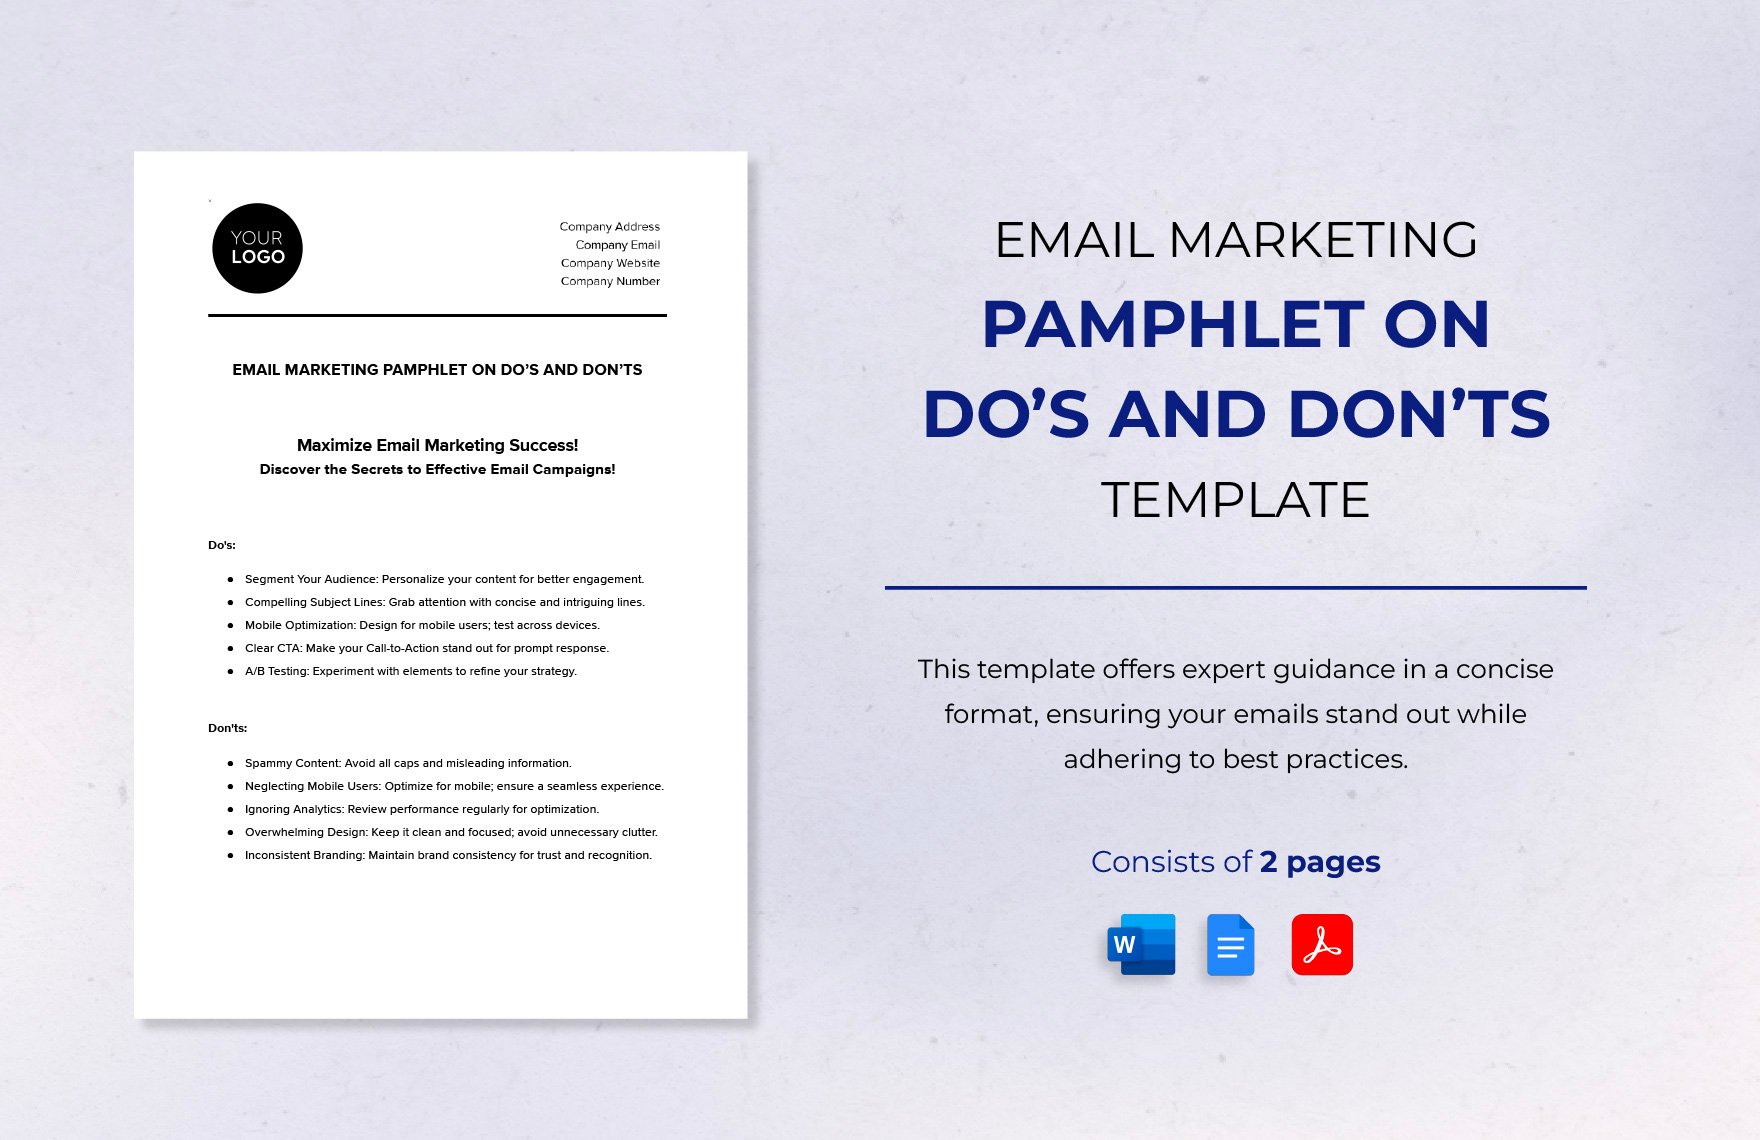 Email Marketing Pamphlet on Do's and Don'ts Template